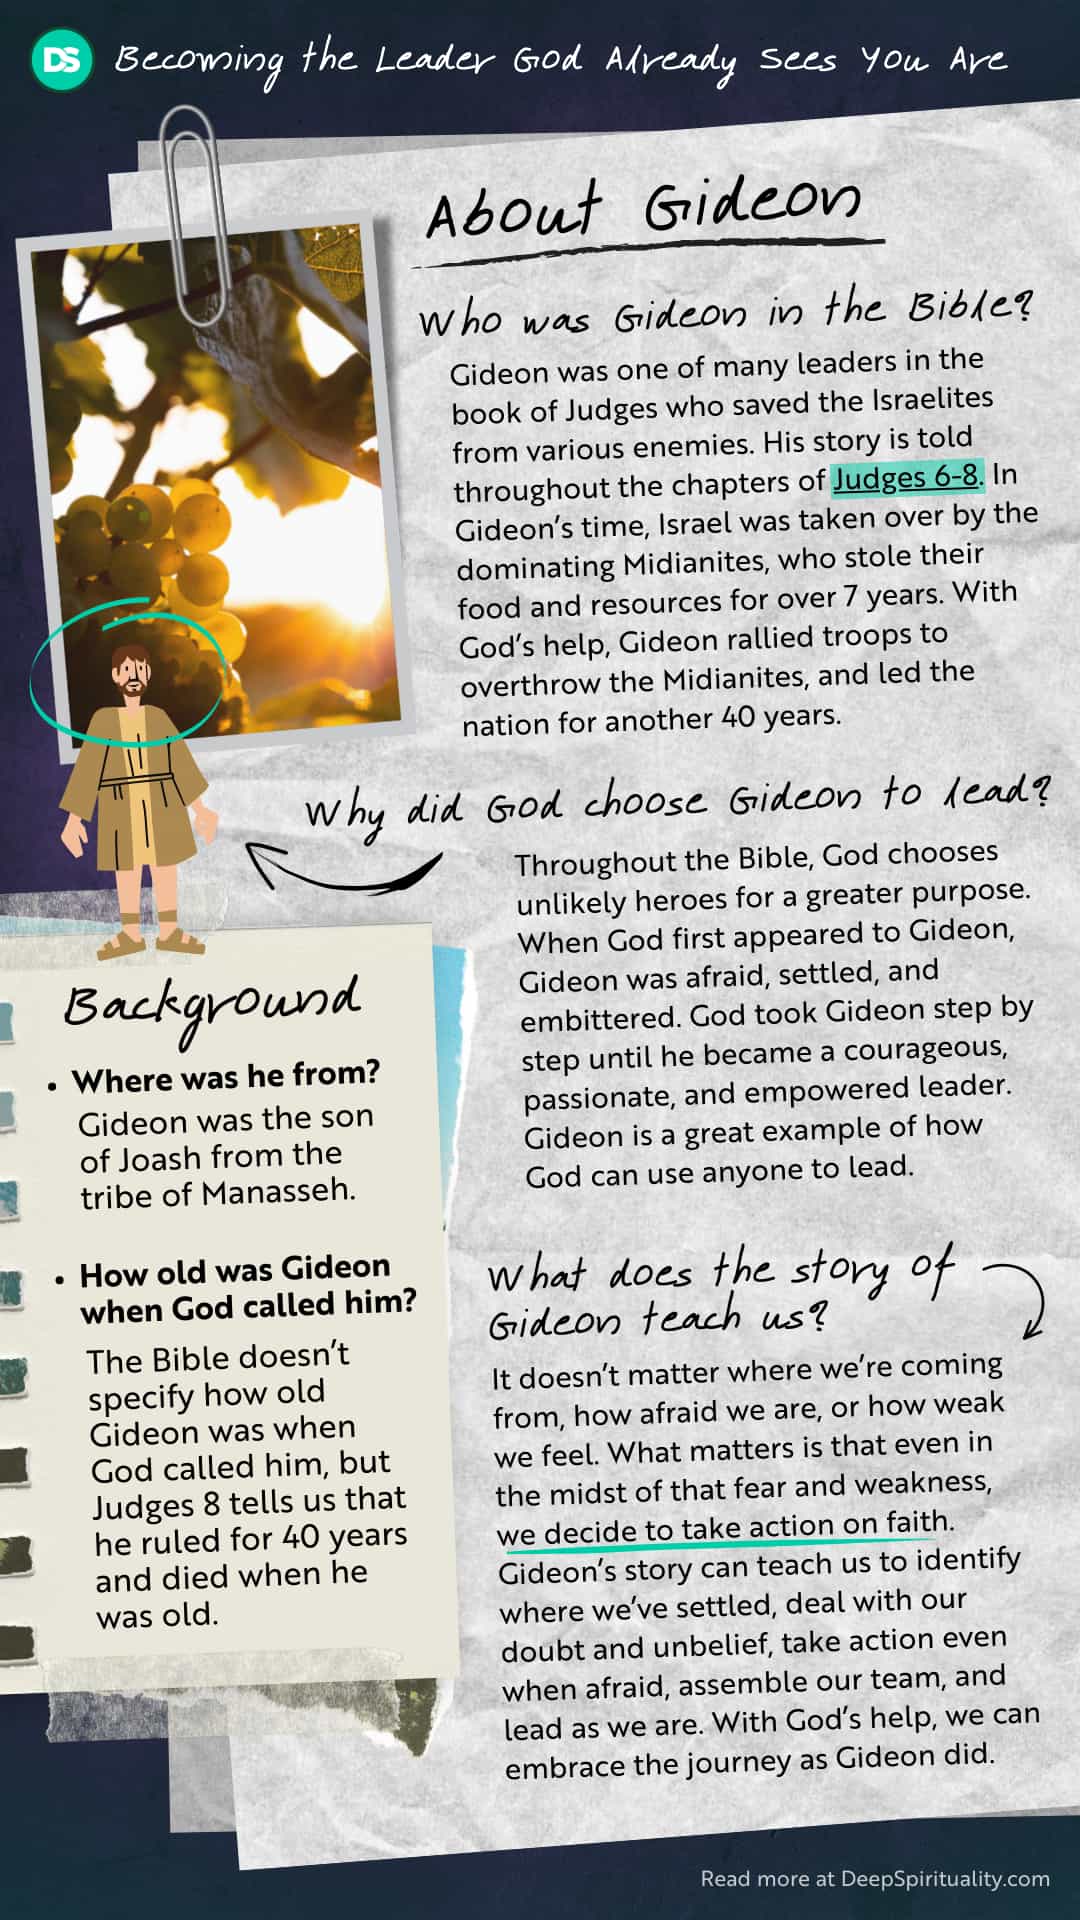 The story of Gideon: quick facts